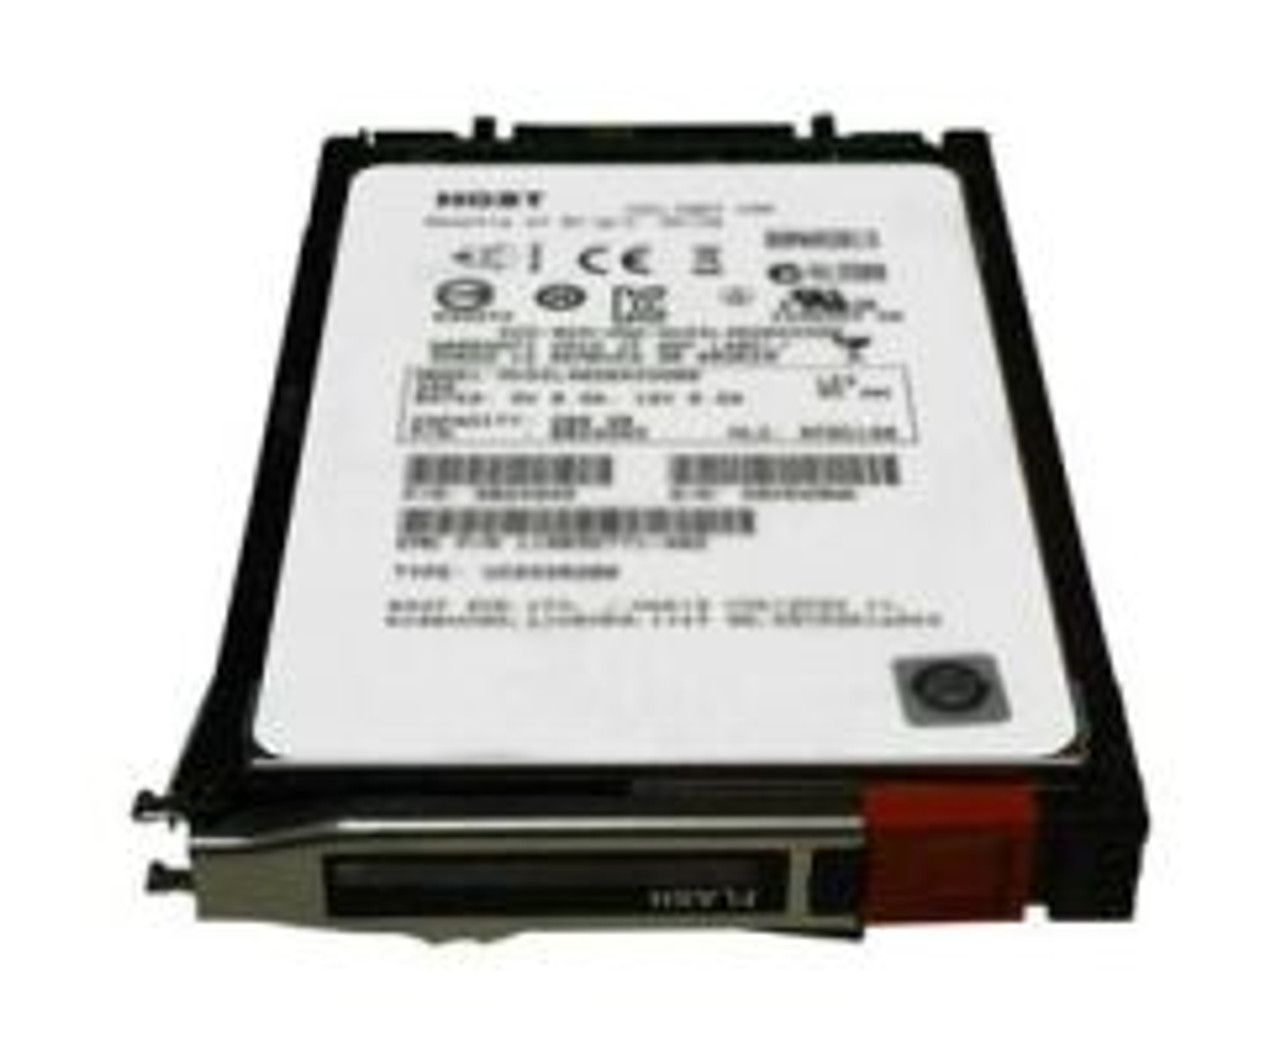 FLV62S6F-200U | Emc | 200Gb Sas 6Gbps Fast Cache 2.5-Inch Internal Solid State Drive Upgrade For Vnxe3200 25 X 2.5 Enclosure